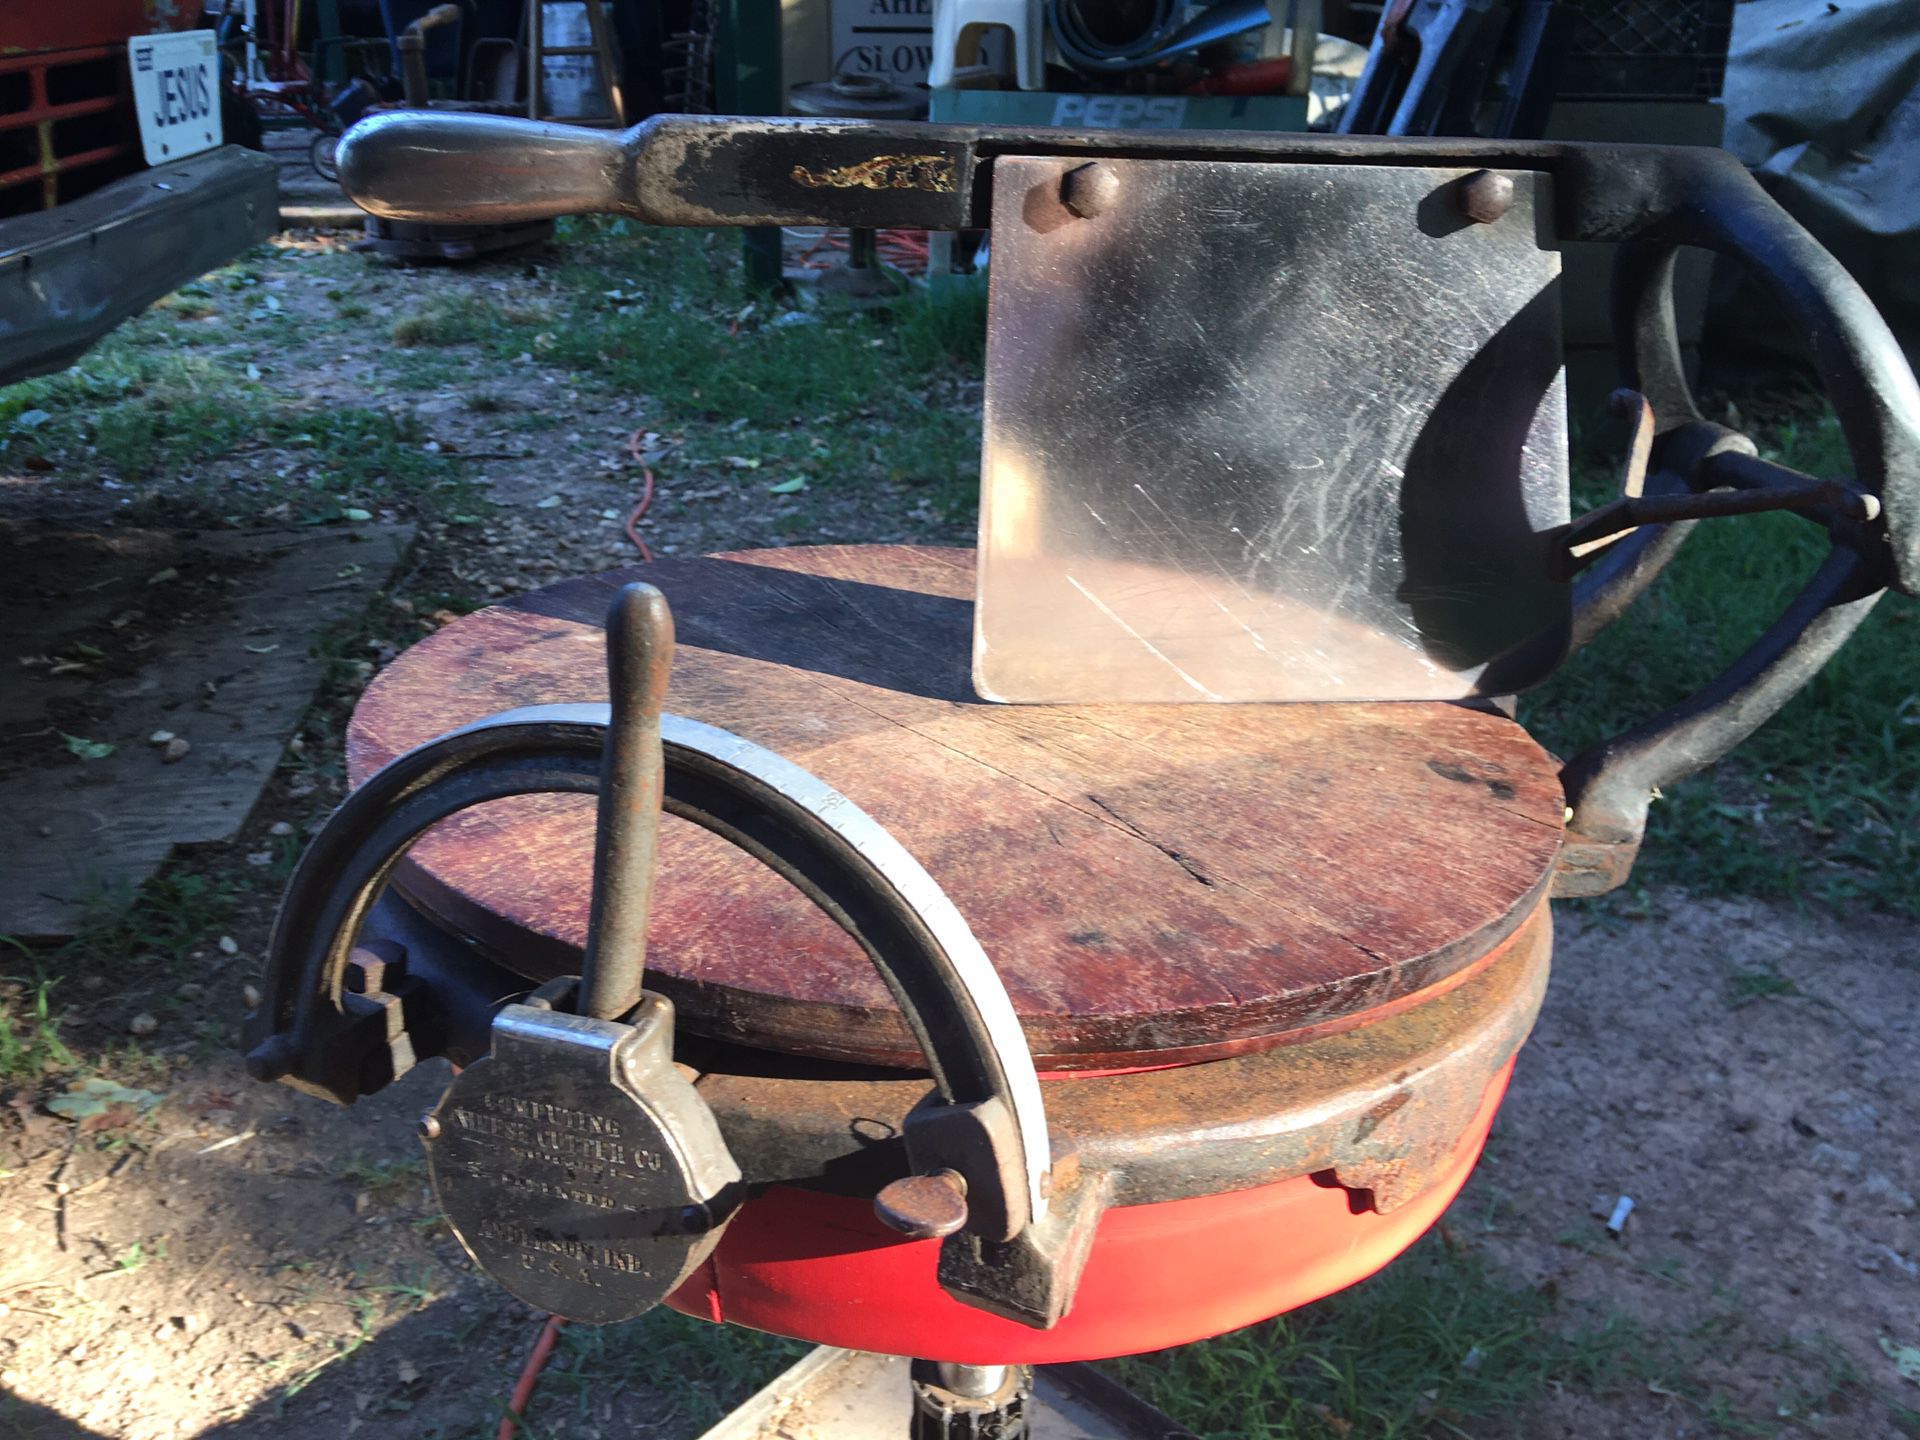 Antique Cheese Cutter Used In Old General Stores To Cut Wheels Of Cheese  for Sale in Vancouver, WA - OfferUp